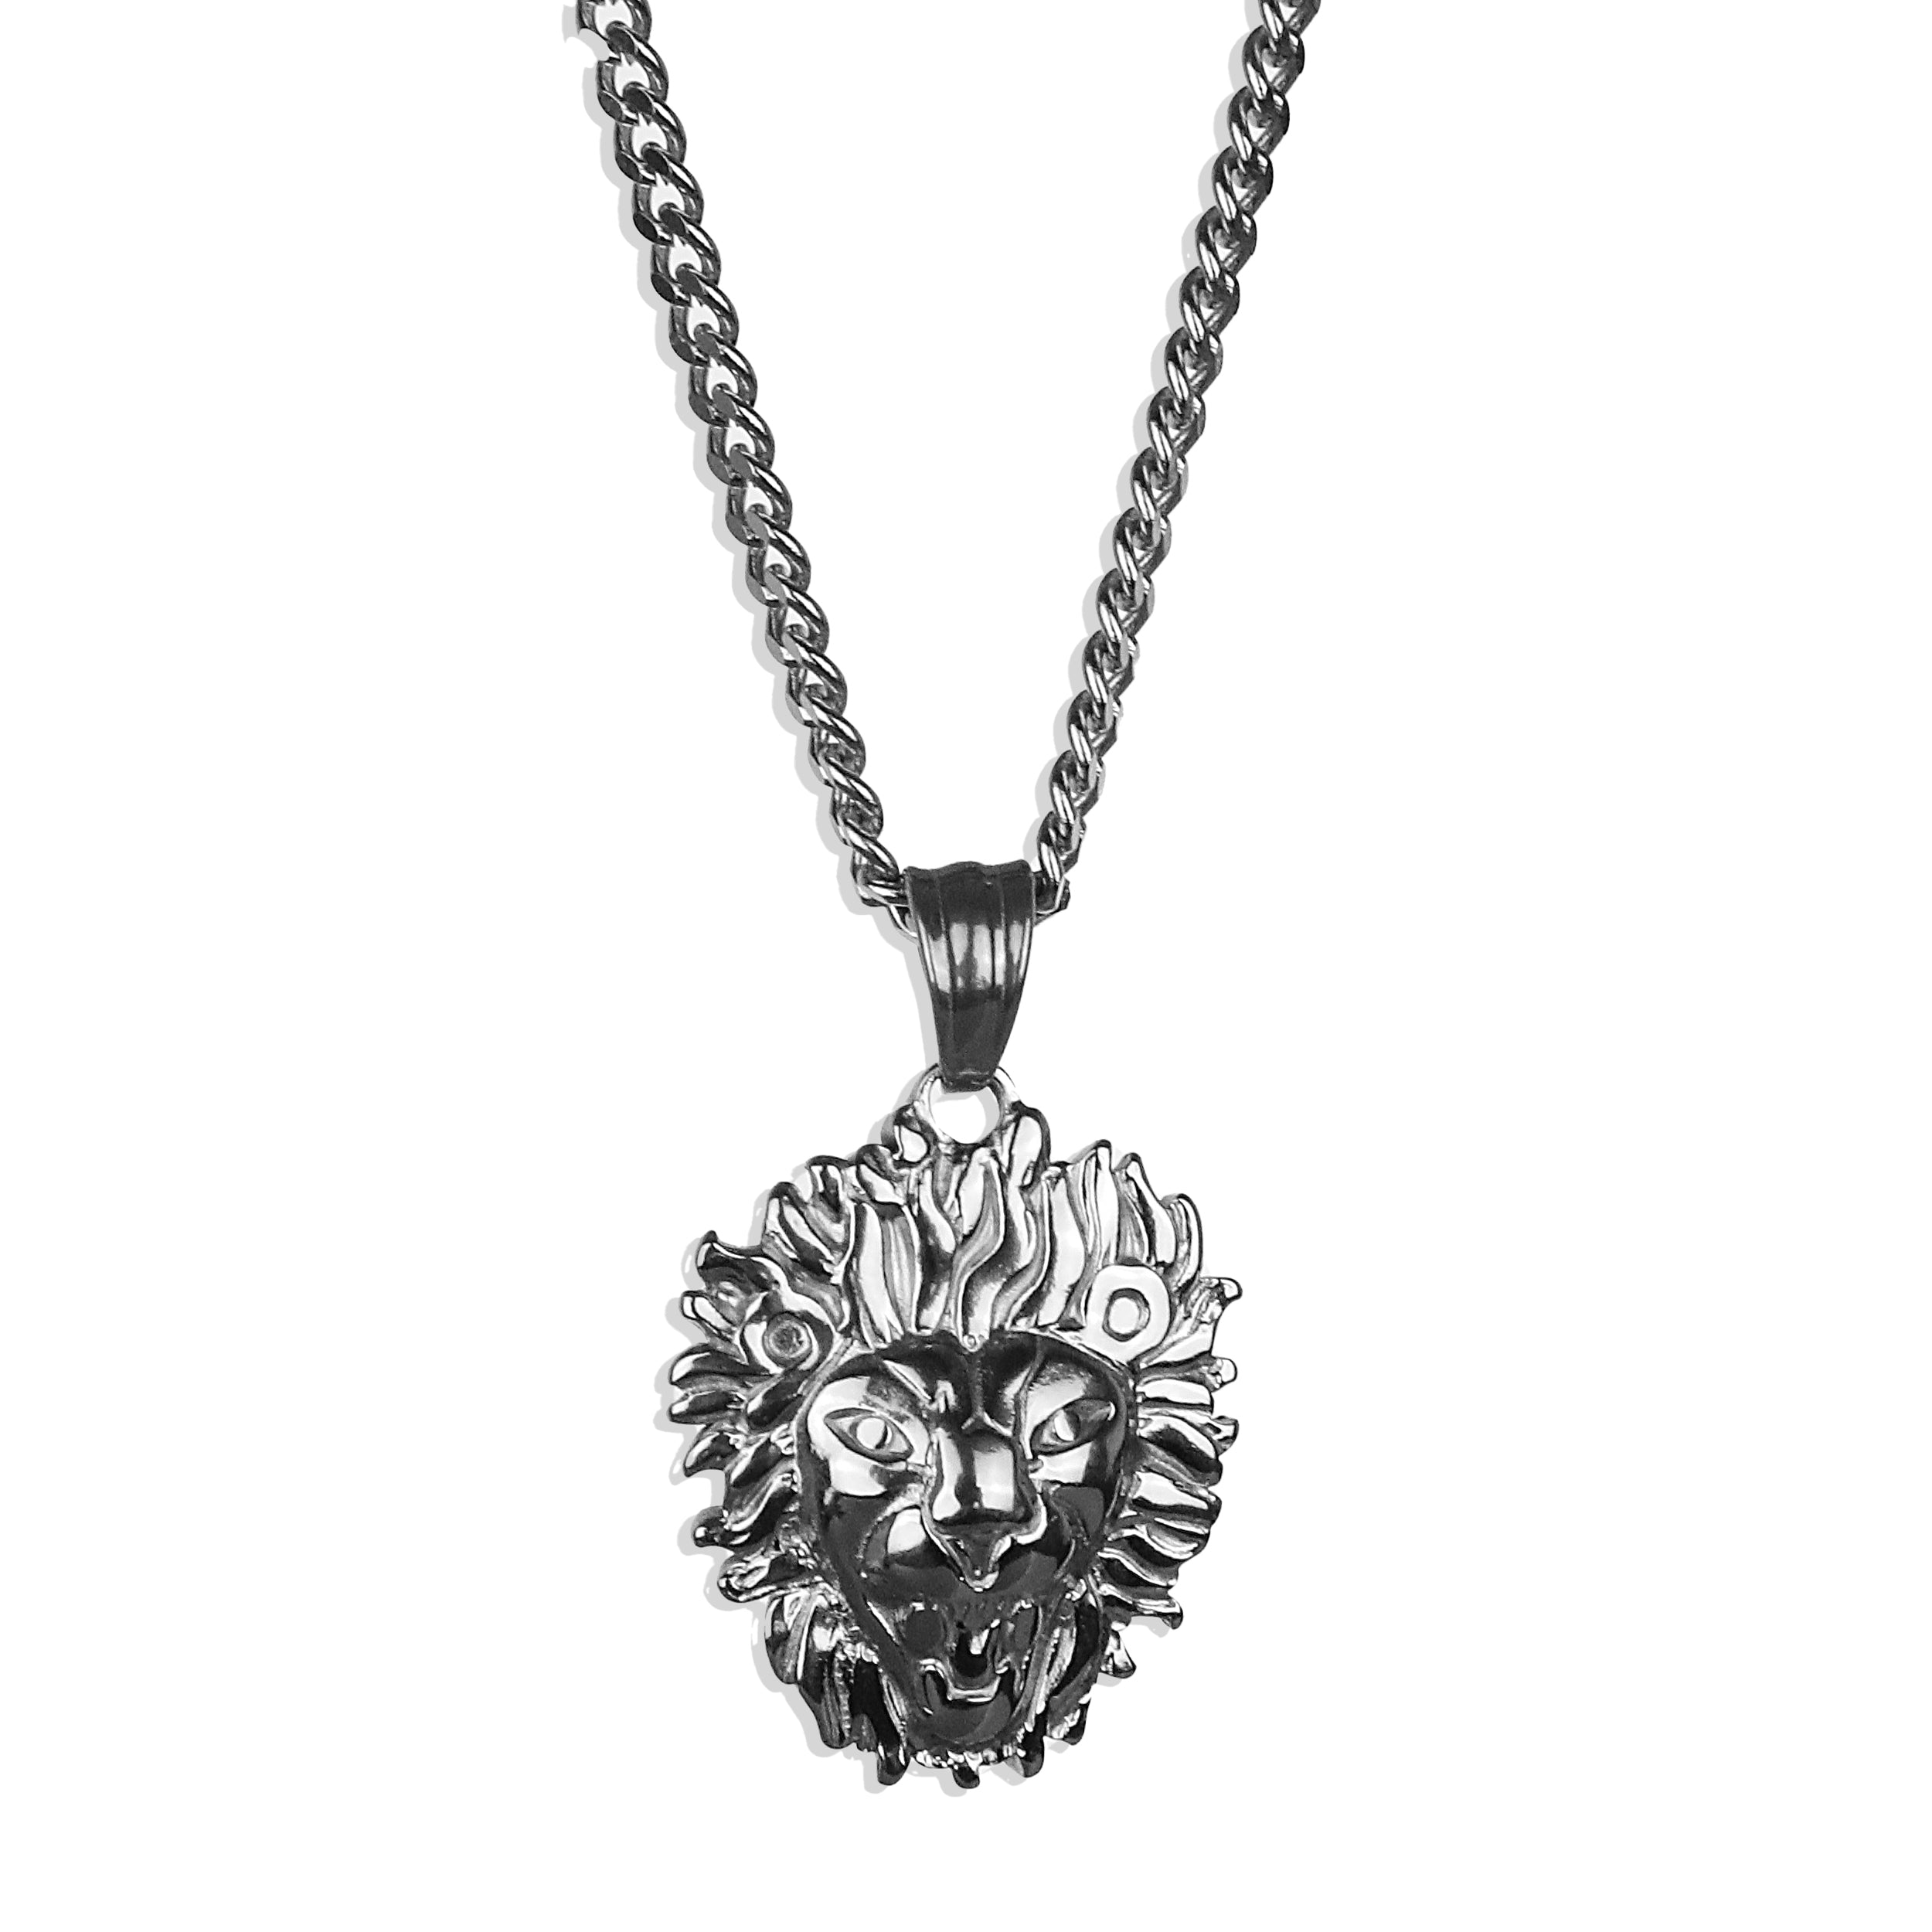 Courage Amulet Necklace - Silver